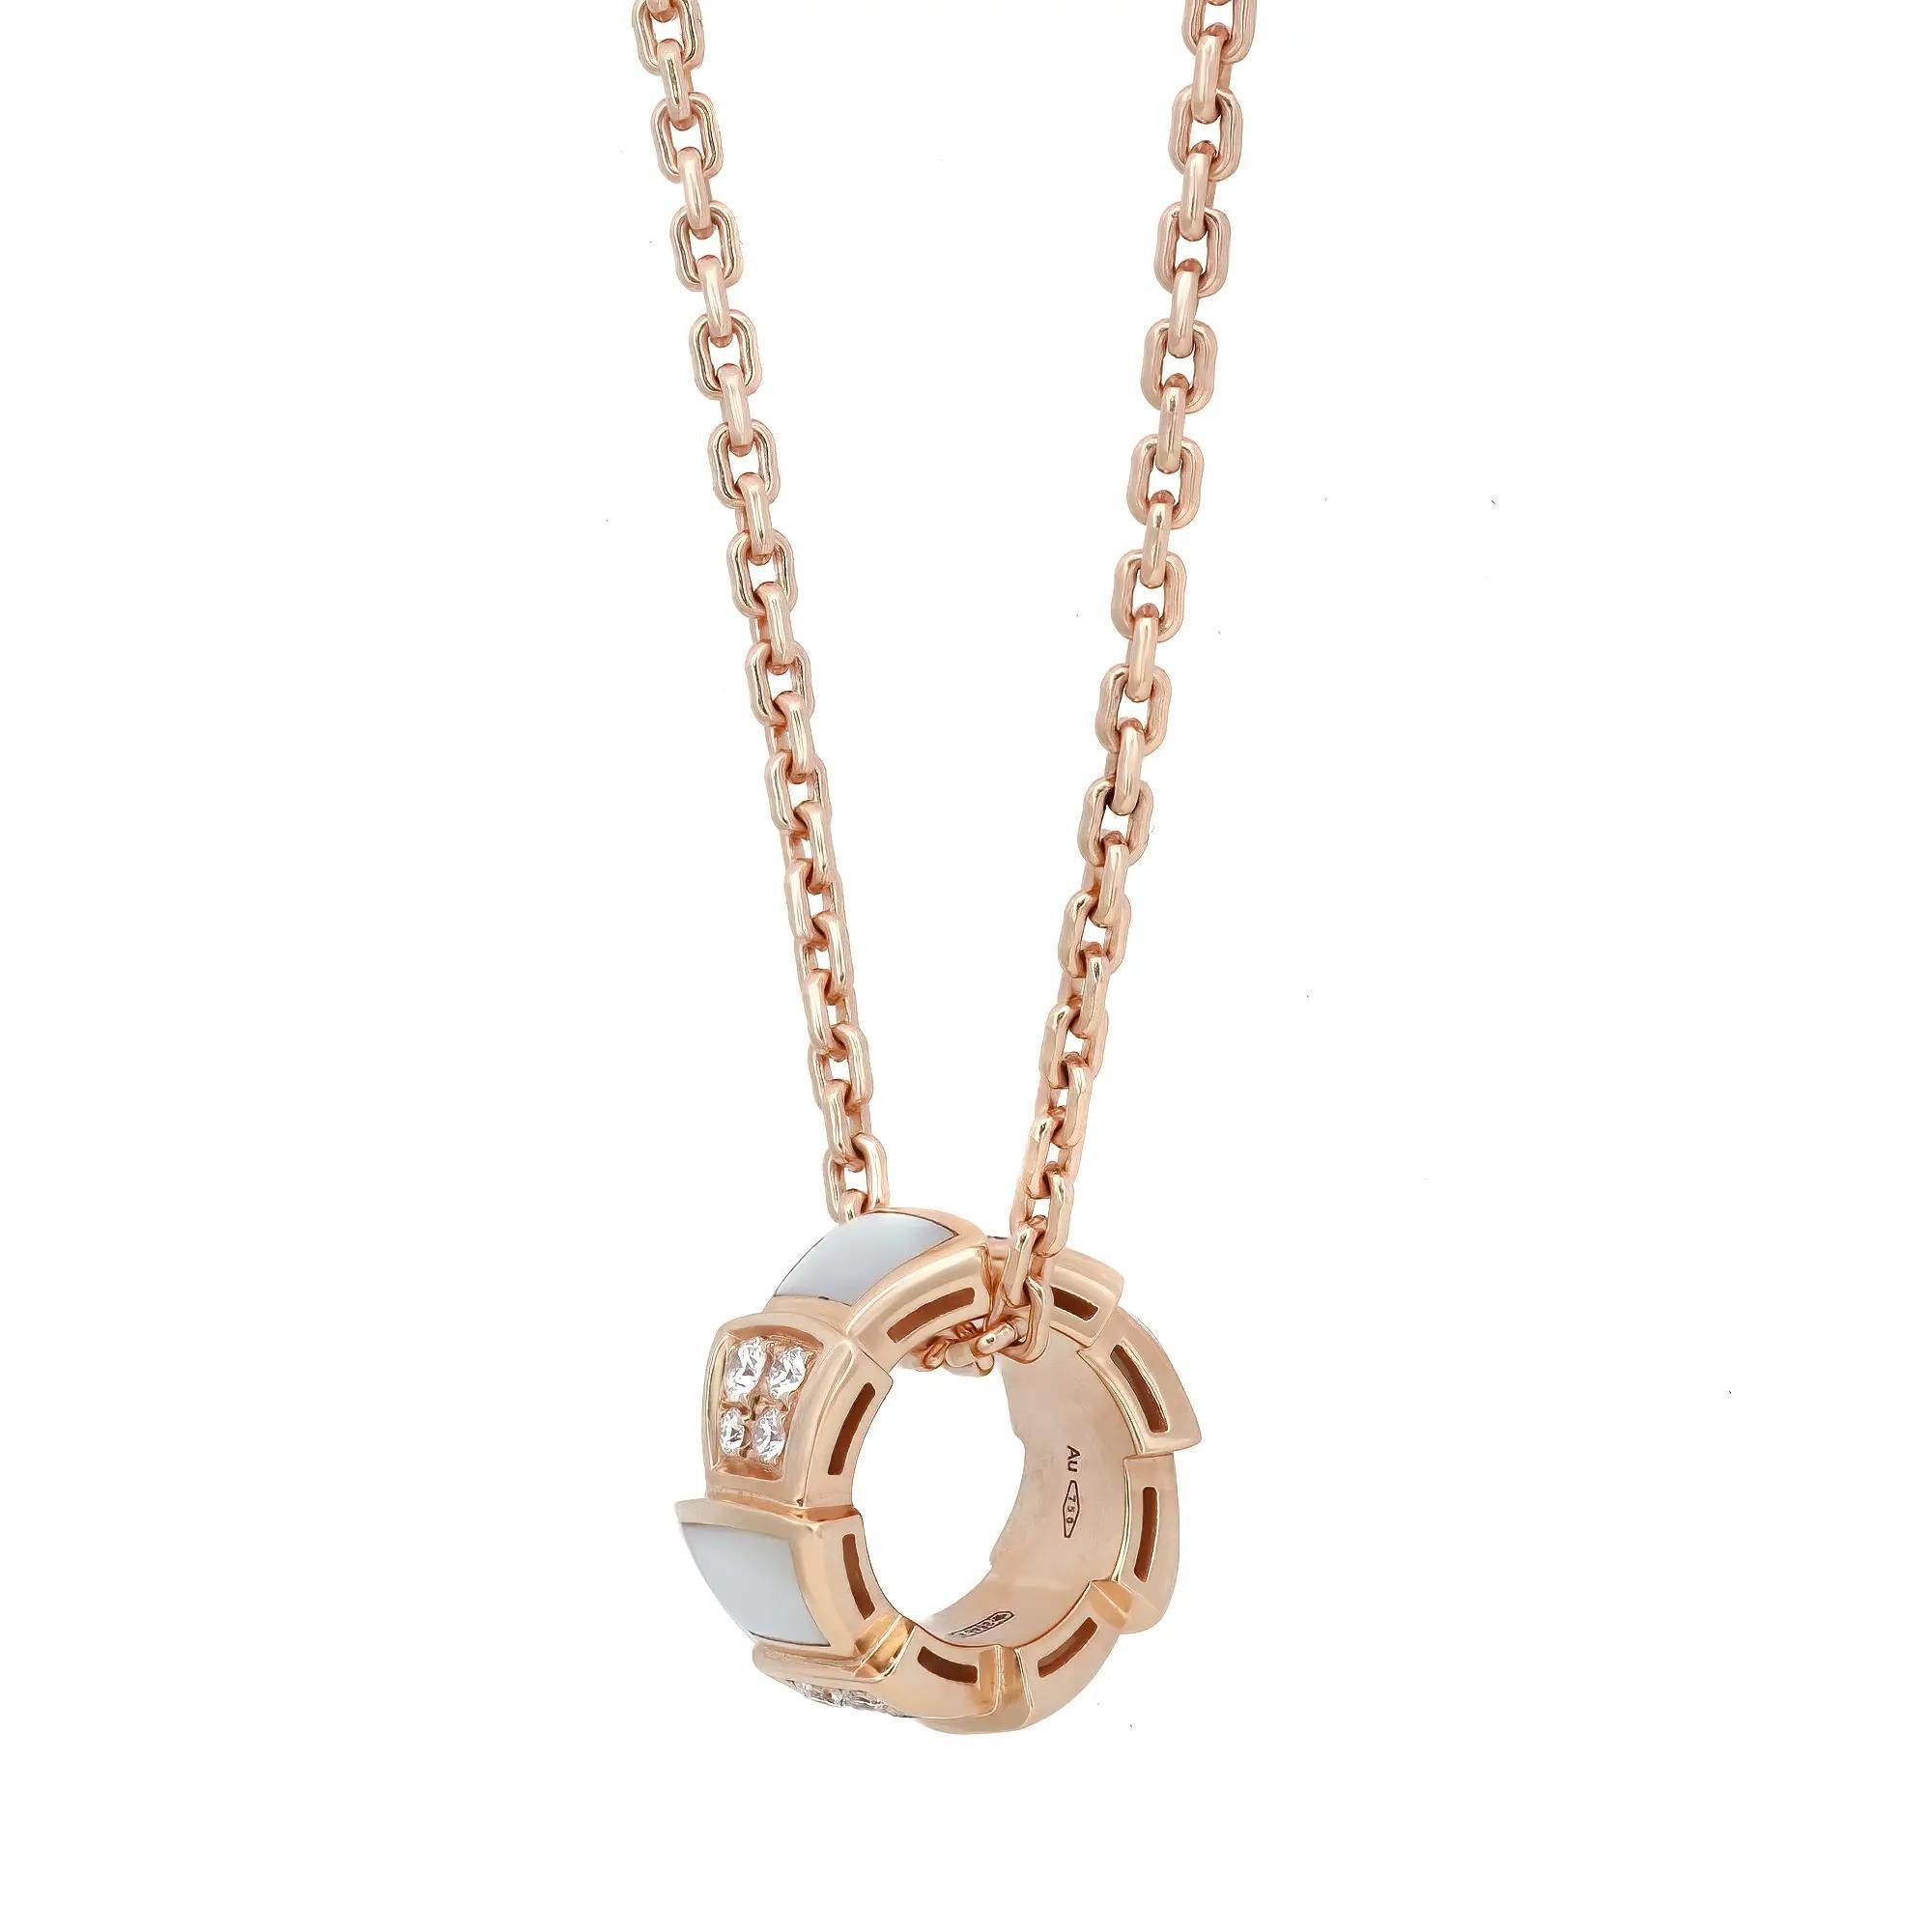 Sophisticated and stylish, Bvlgari Serpenti Viper pendant necklace. This beautiful pendant coils sensually around the chain necklace and stands out the beauty of its enveloping curves studded alternatively with inserts of white mother of pearl on